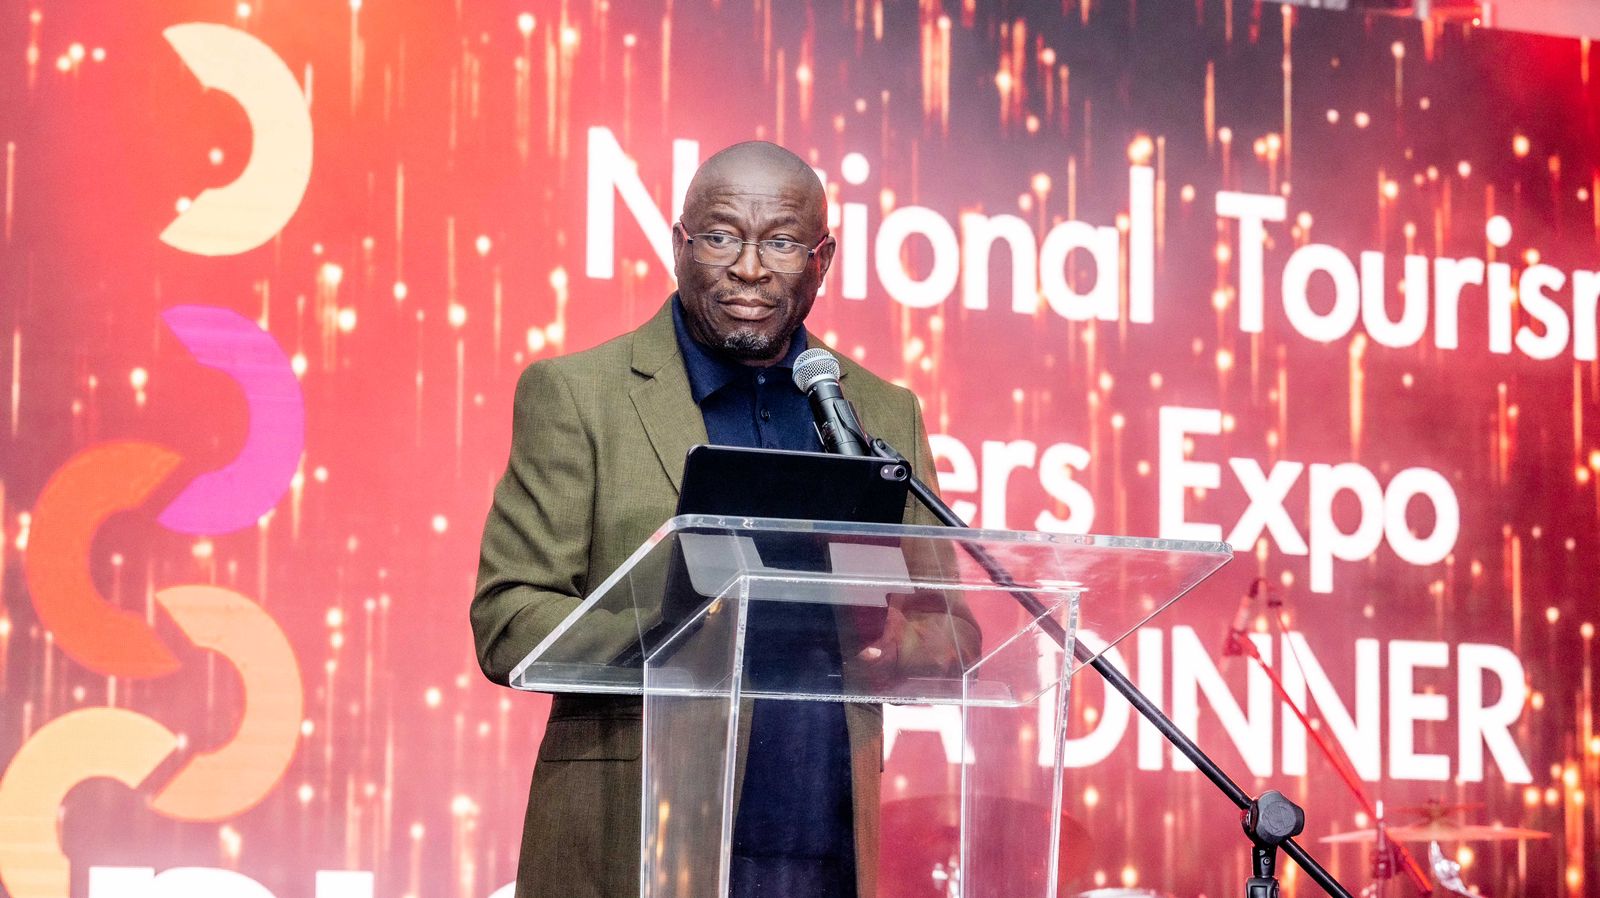 Remarks by the Deputy Minister of Tourism, Mr Fish Mahlalela at the National Tourism Careers Expo 2023 gala dinner at NASREC